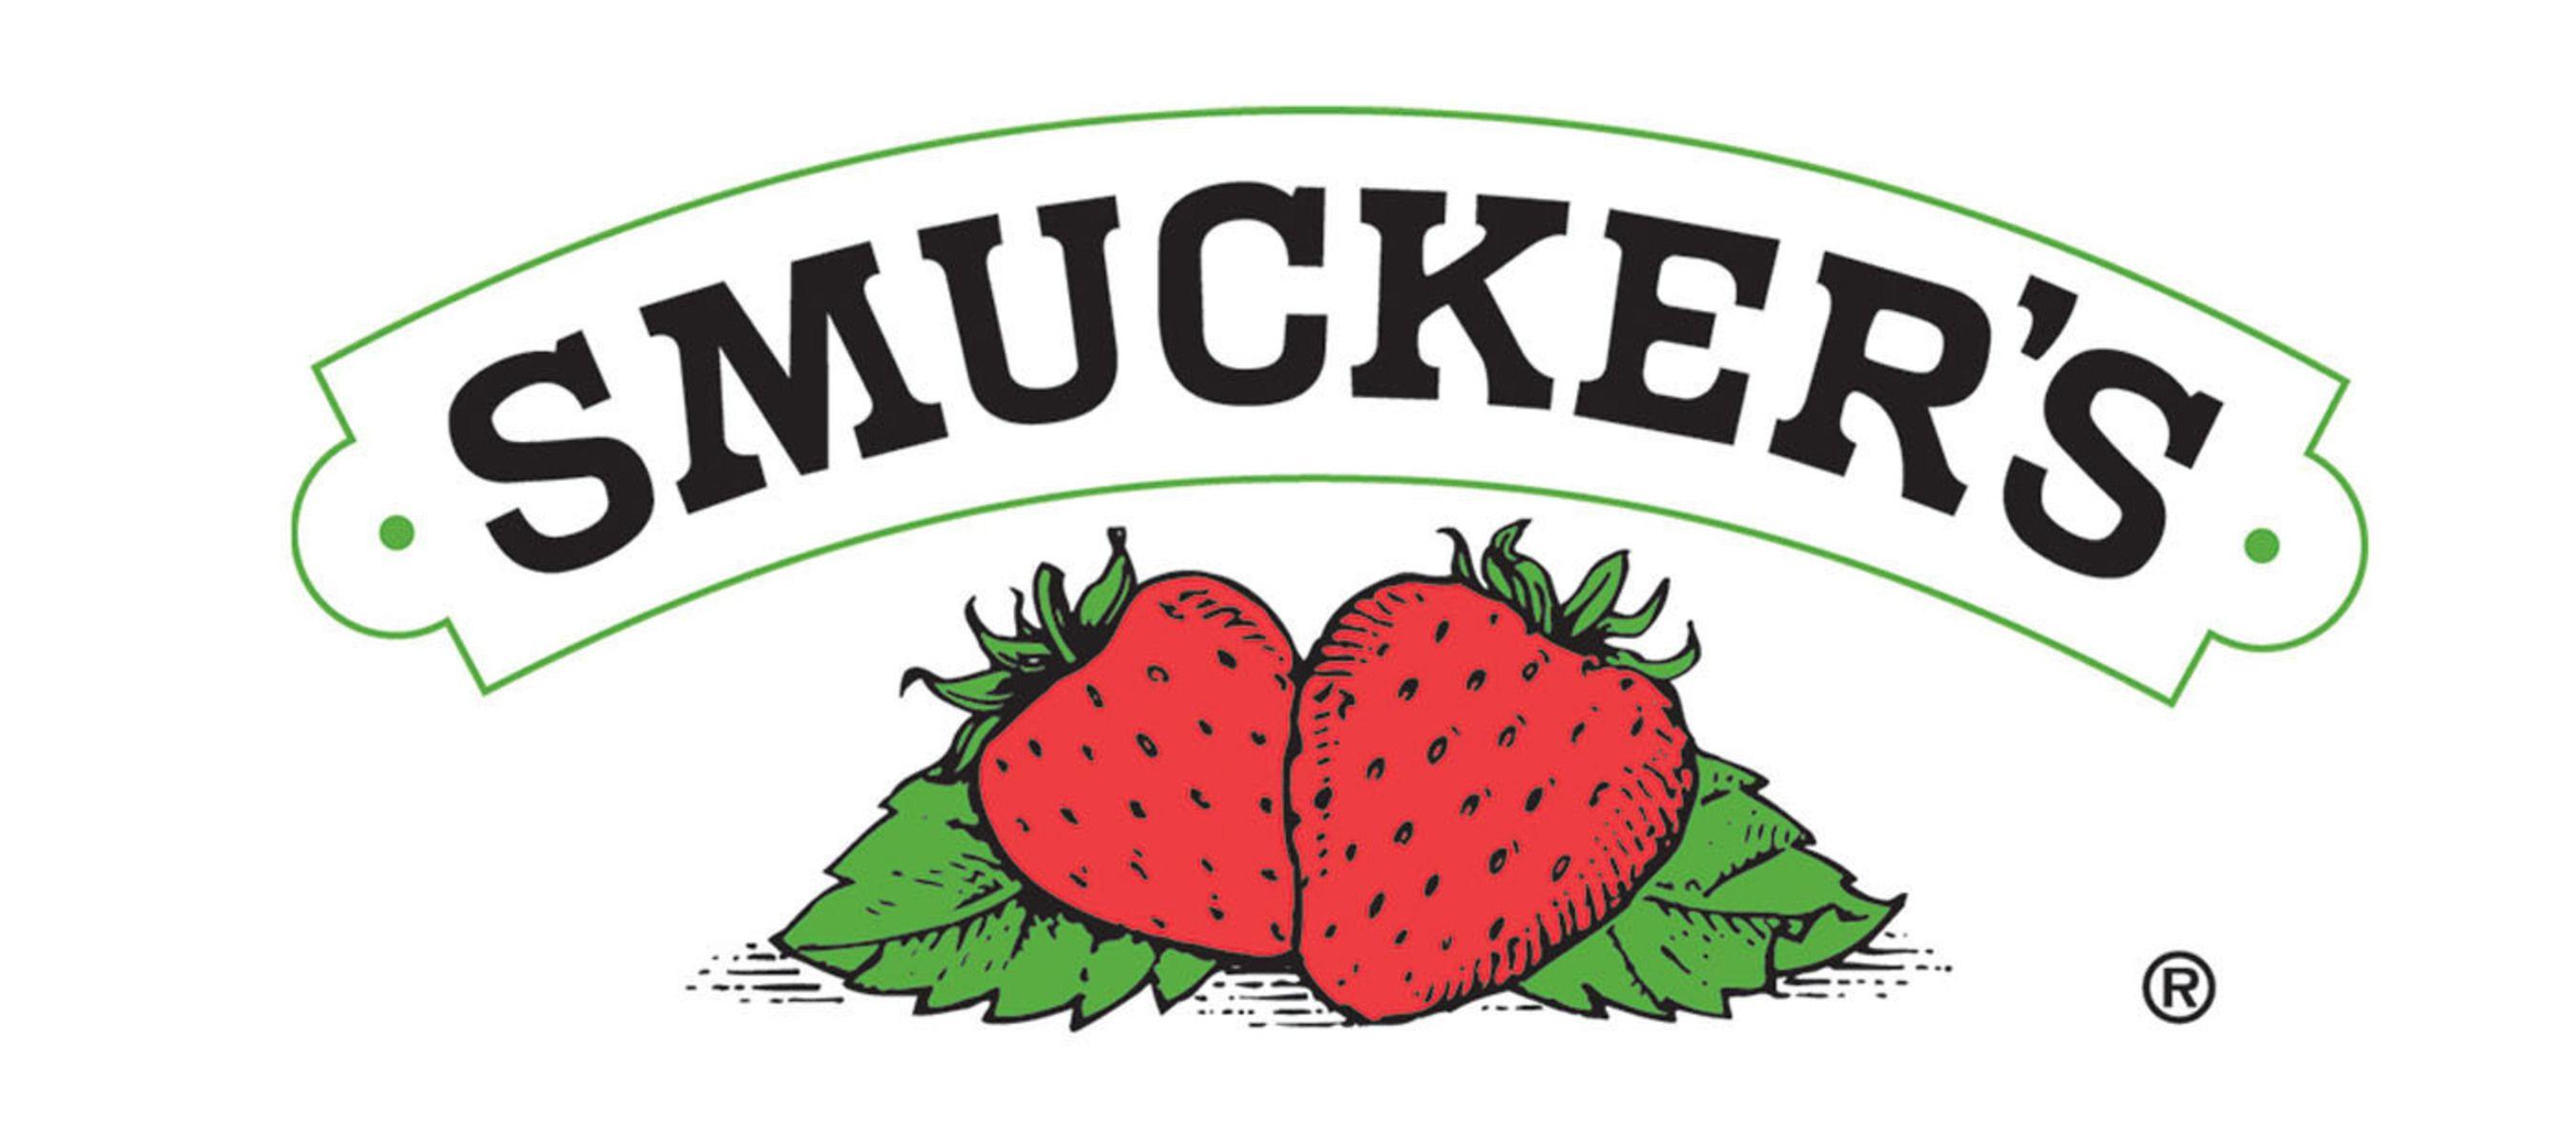 Heart Food Company Logo - The J. M. Smucker Company Completes Acquisition of Big Heart Pet Brands